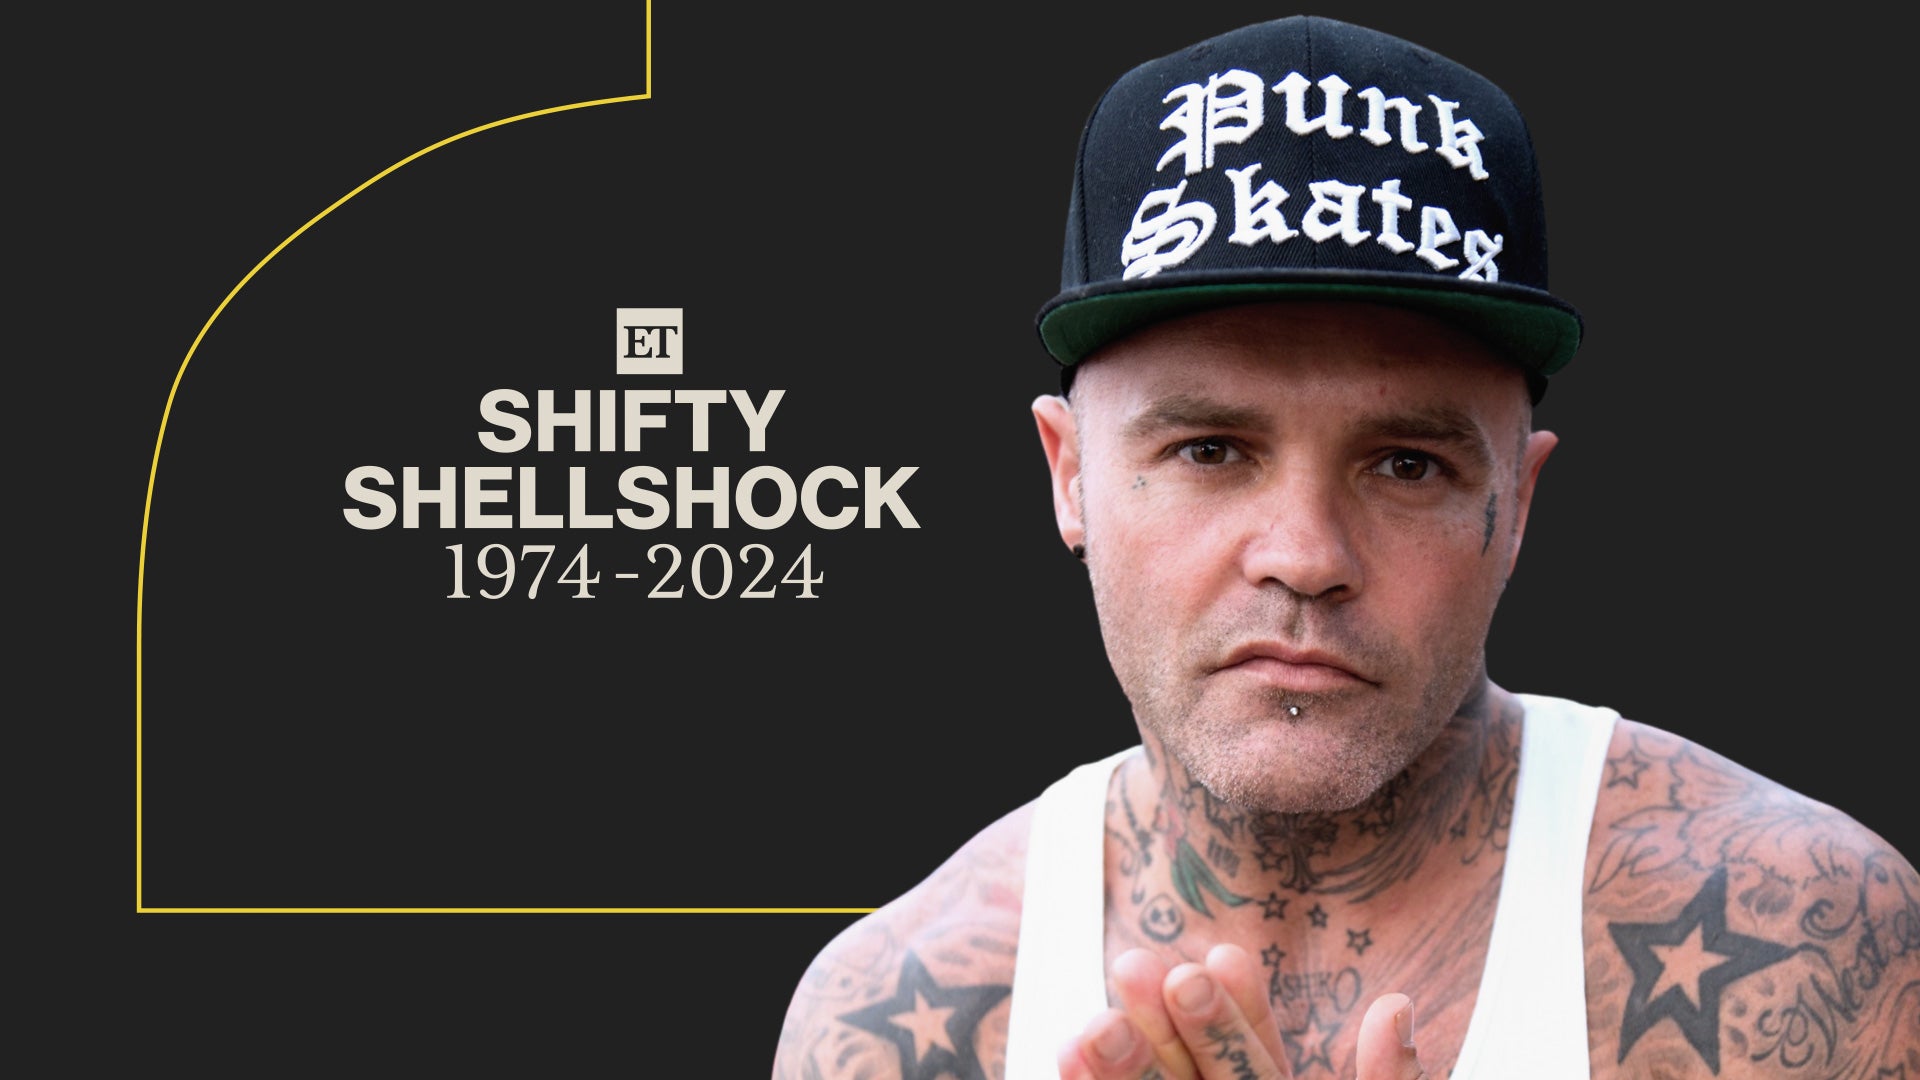 Shifty Shellshock, frontman of Crazy Town and singer of “Butterfly”, dies at the age of 49